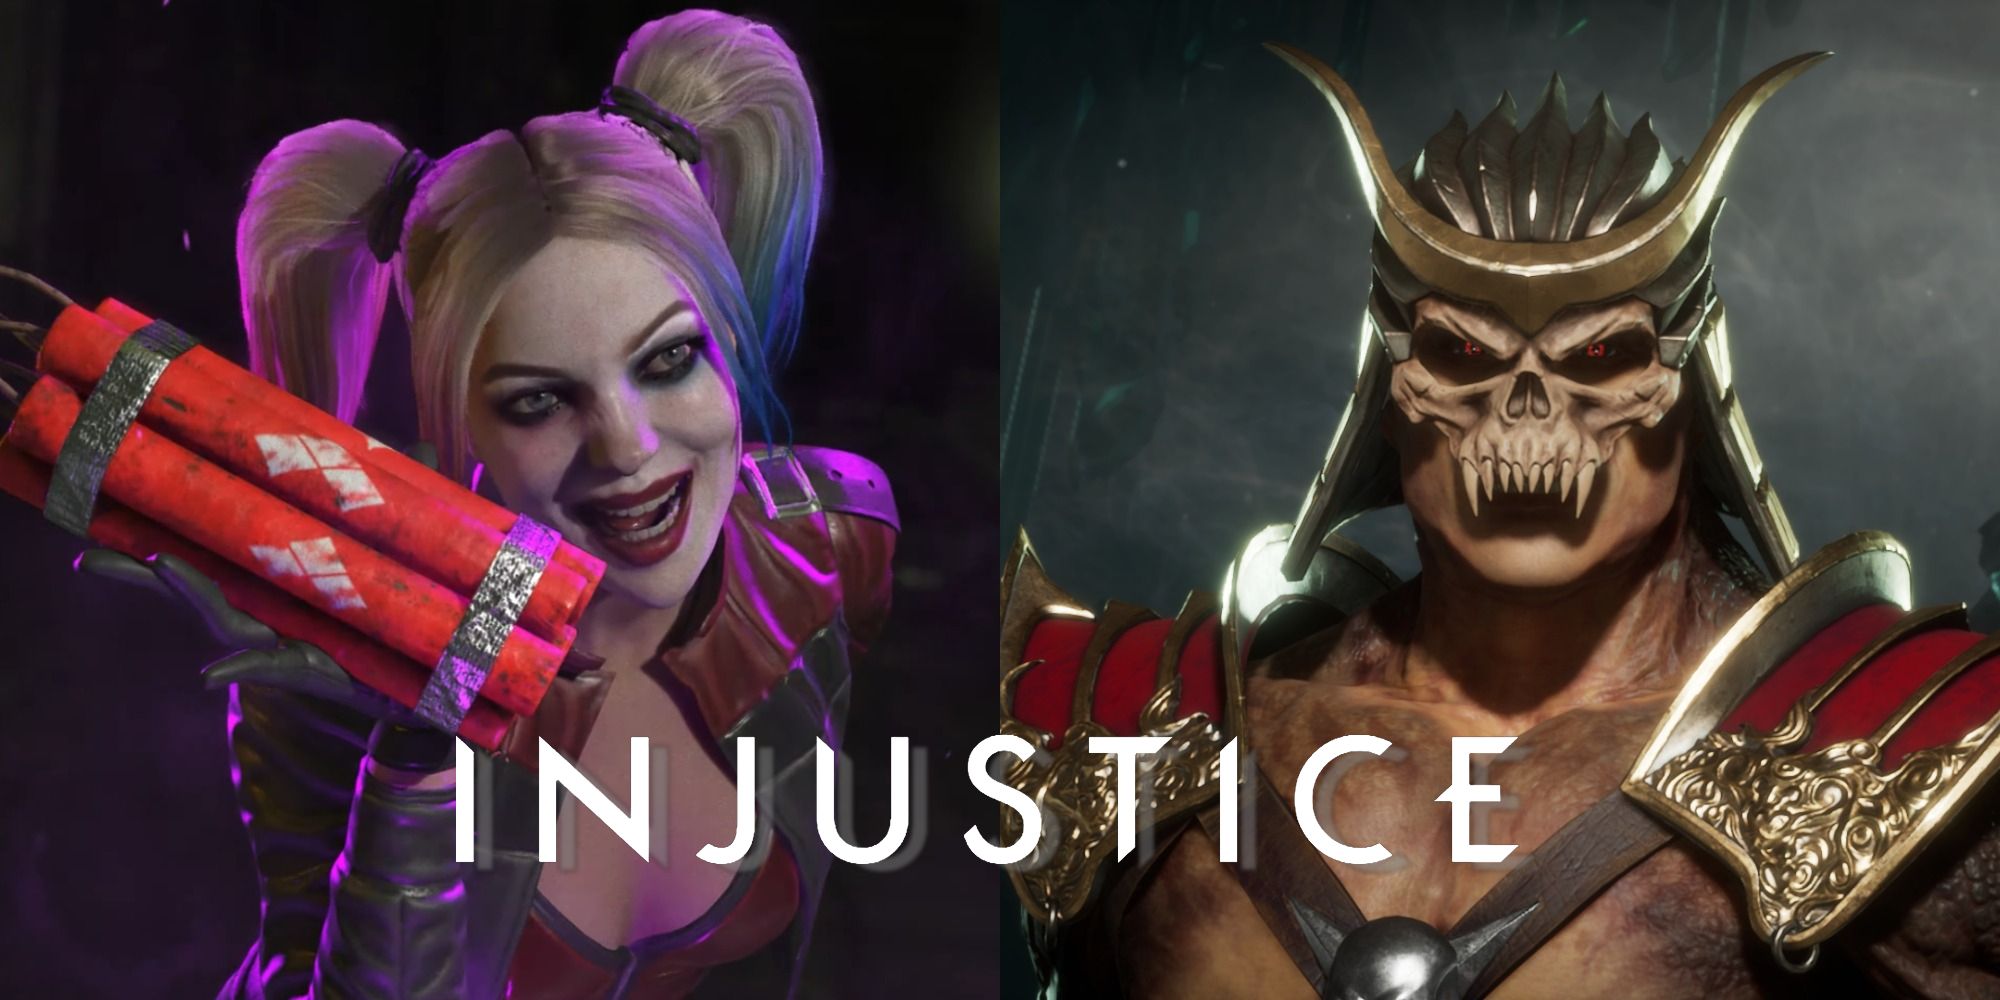 Mortal Kombat characters in the Injustice games